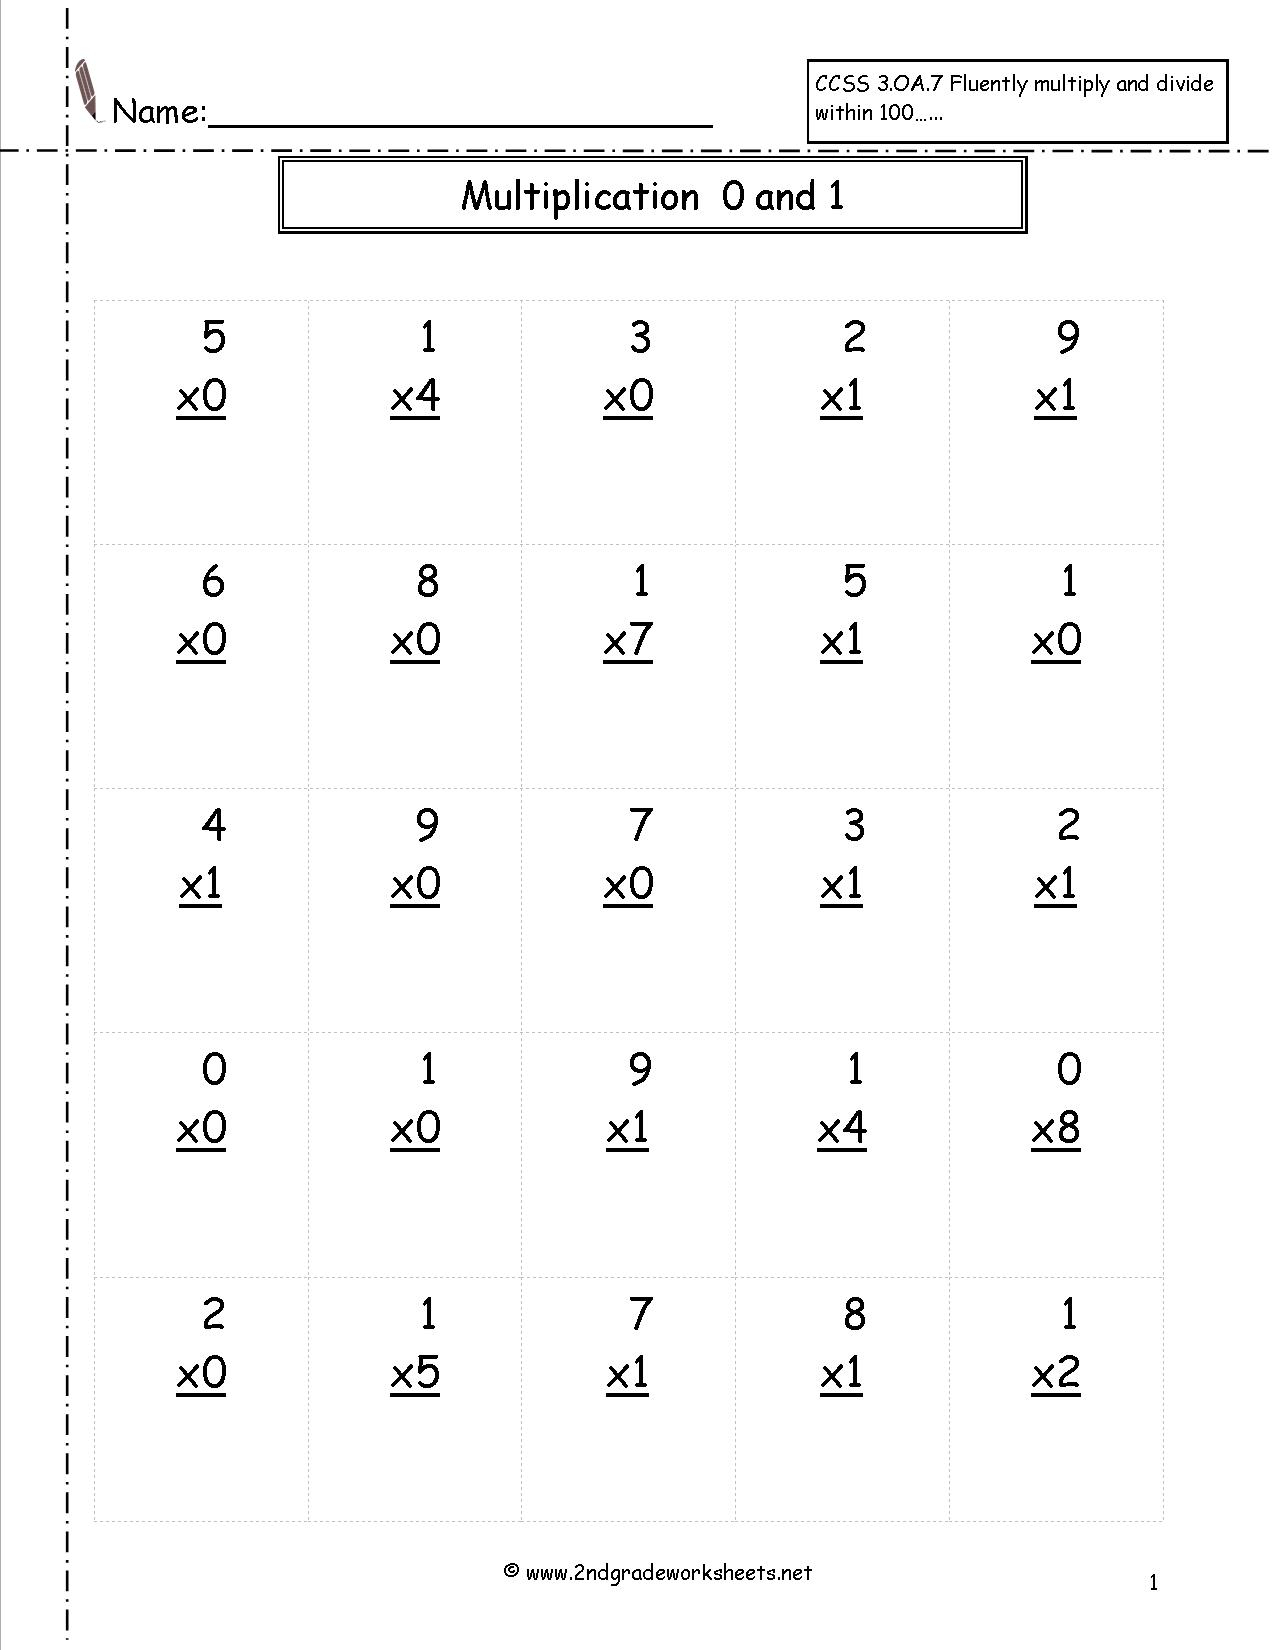 Multiplication Worksheets And Printouts with 4's Multiplication Worksheets 100 Problems